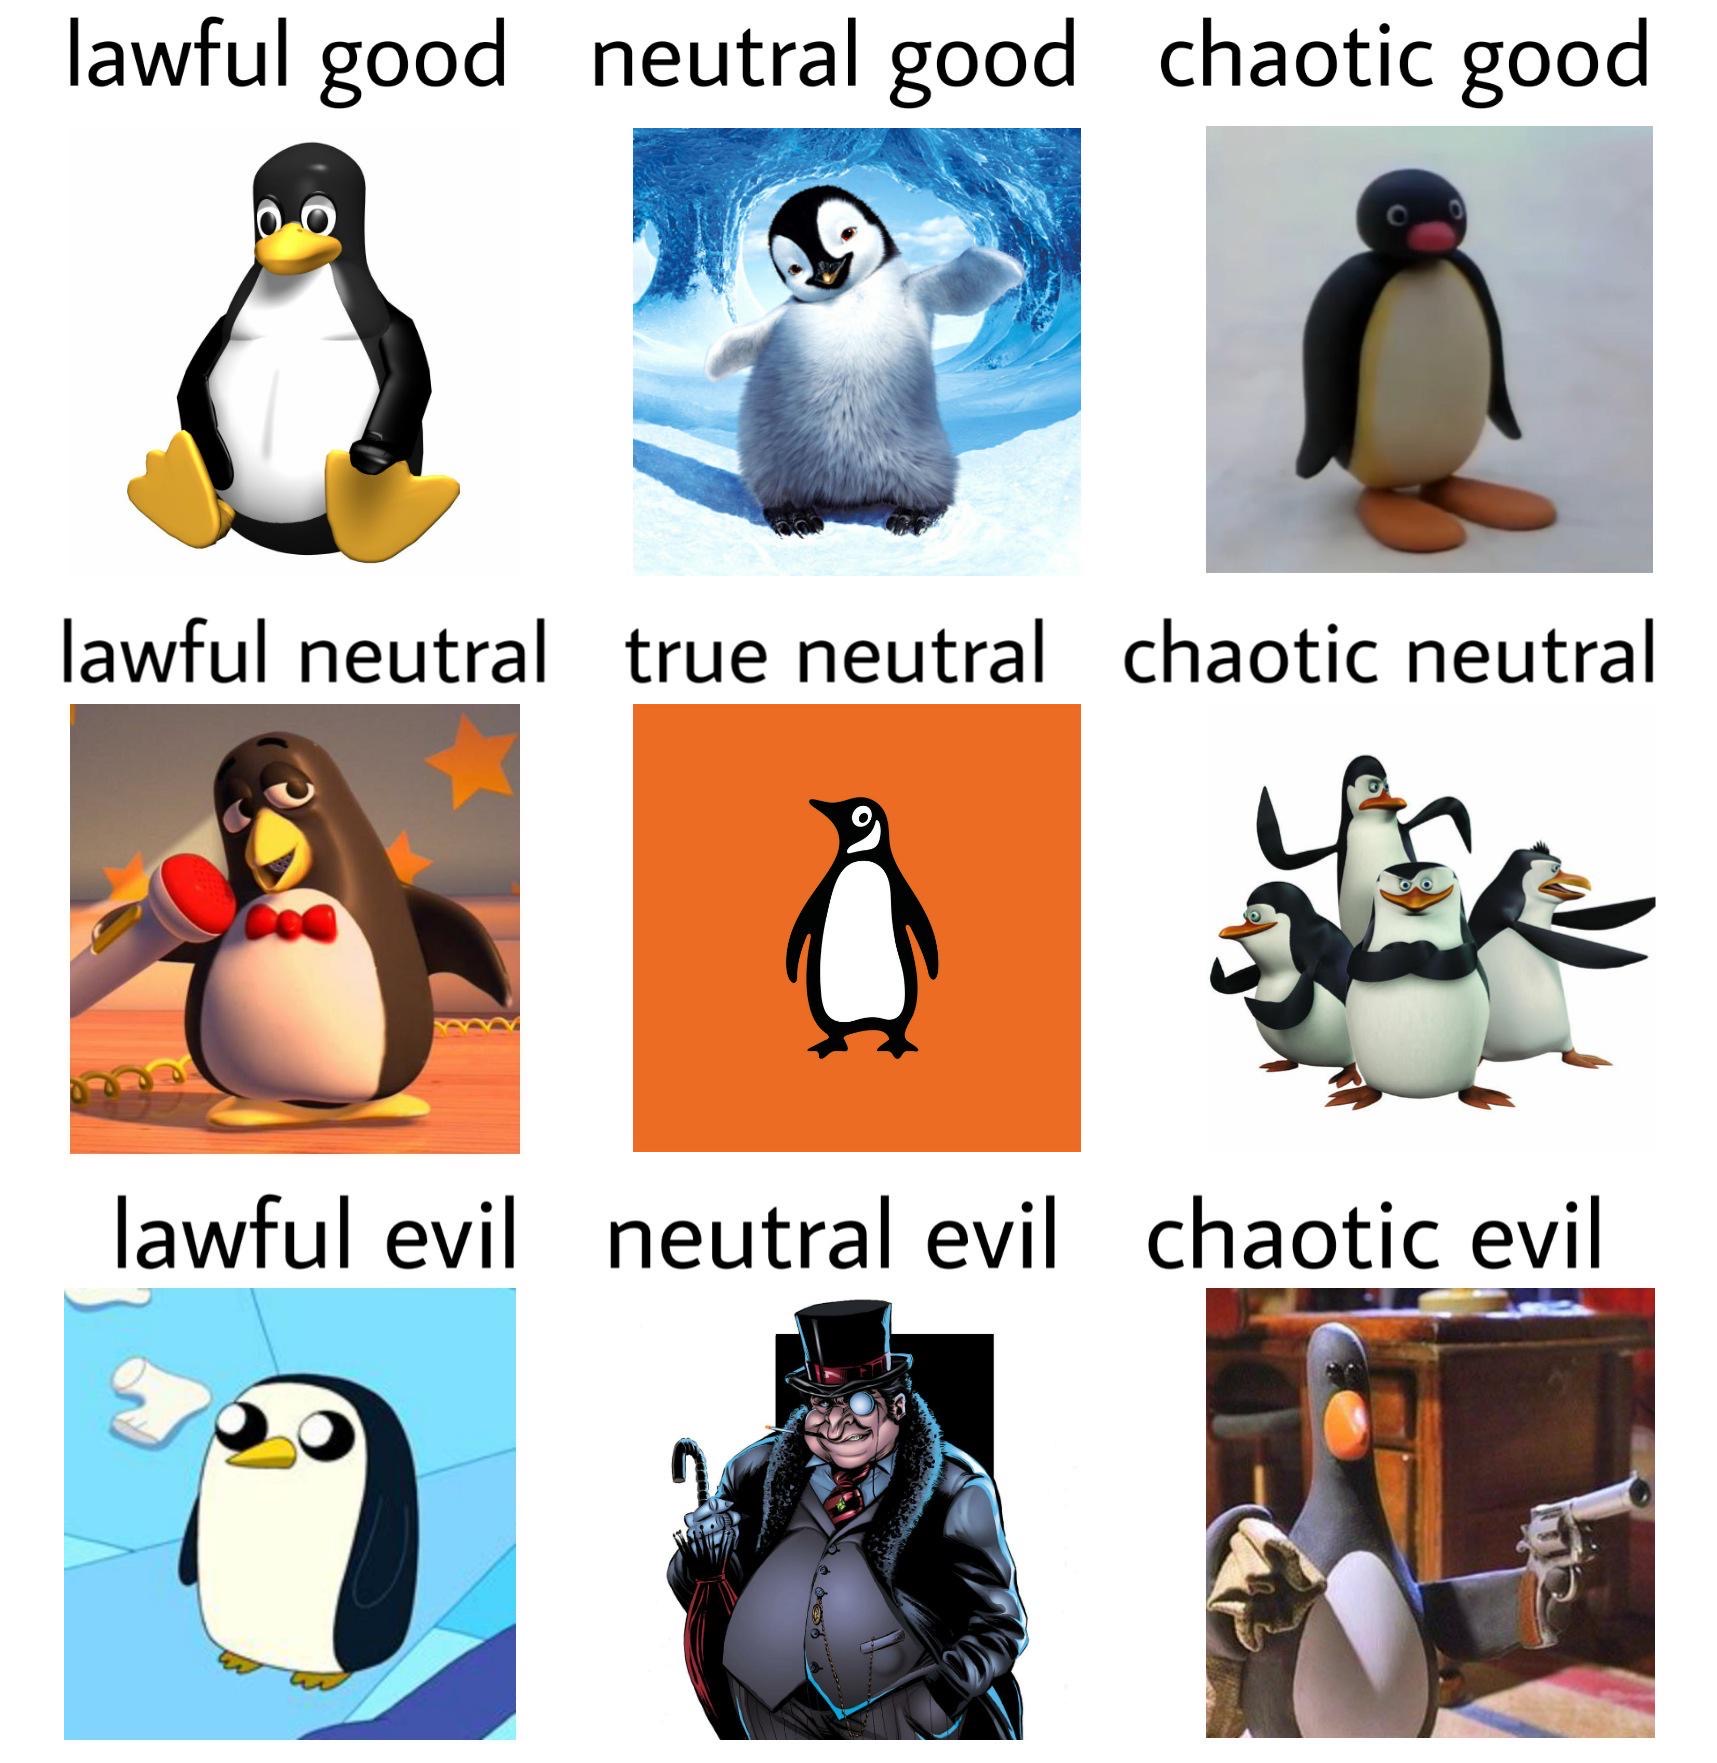 penguin - lawful good neutral good chaotic good lawful neutral true neutral chaotic neutral lawful evil neutral evil chaotic evil